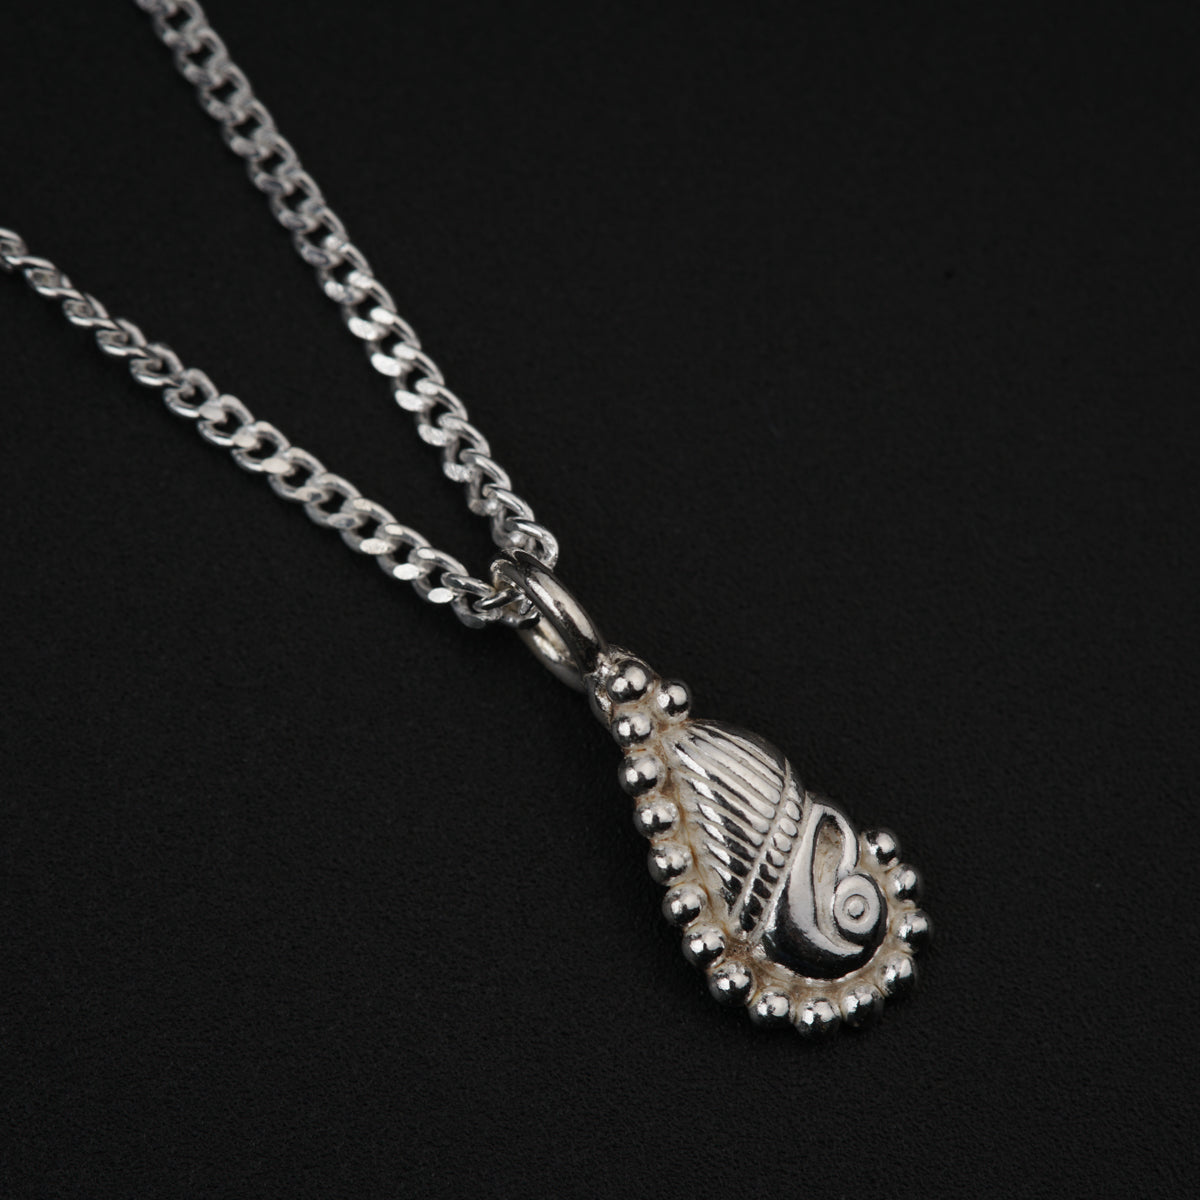 Daily Wear Silver Shiny Peacock Necklace